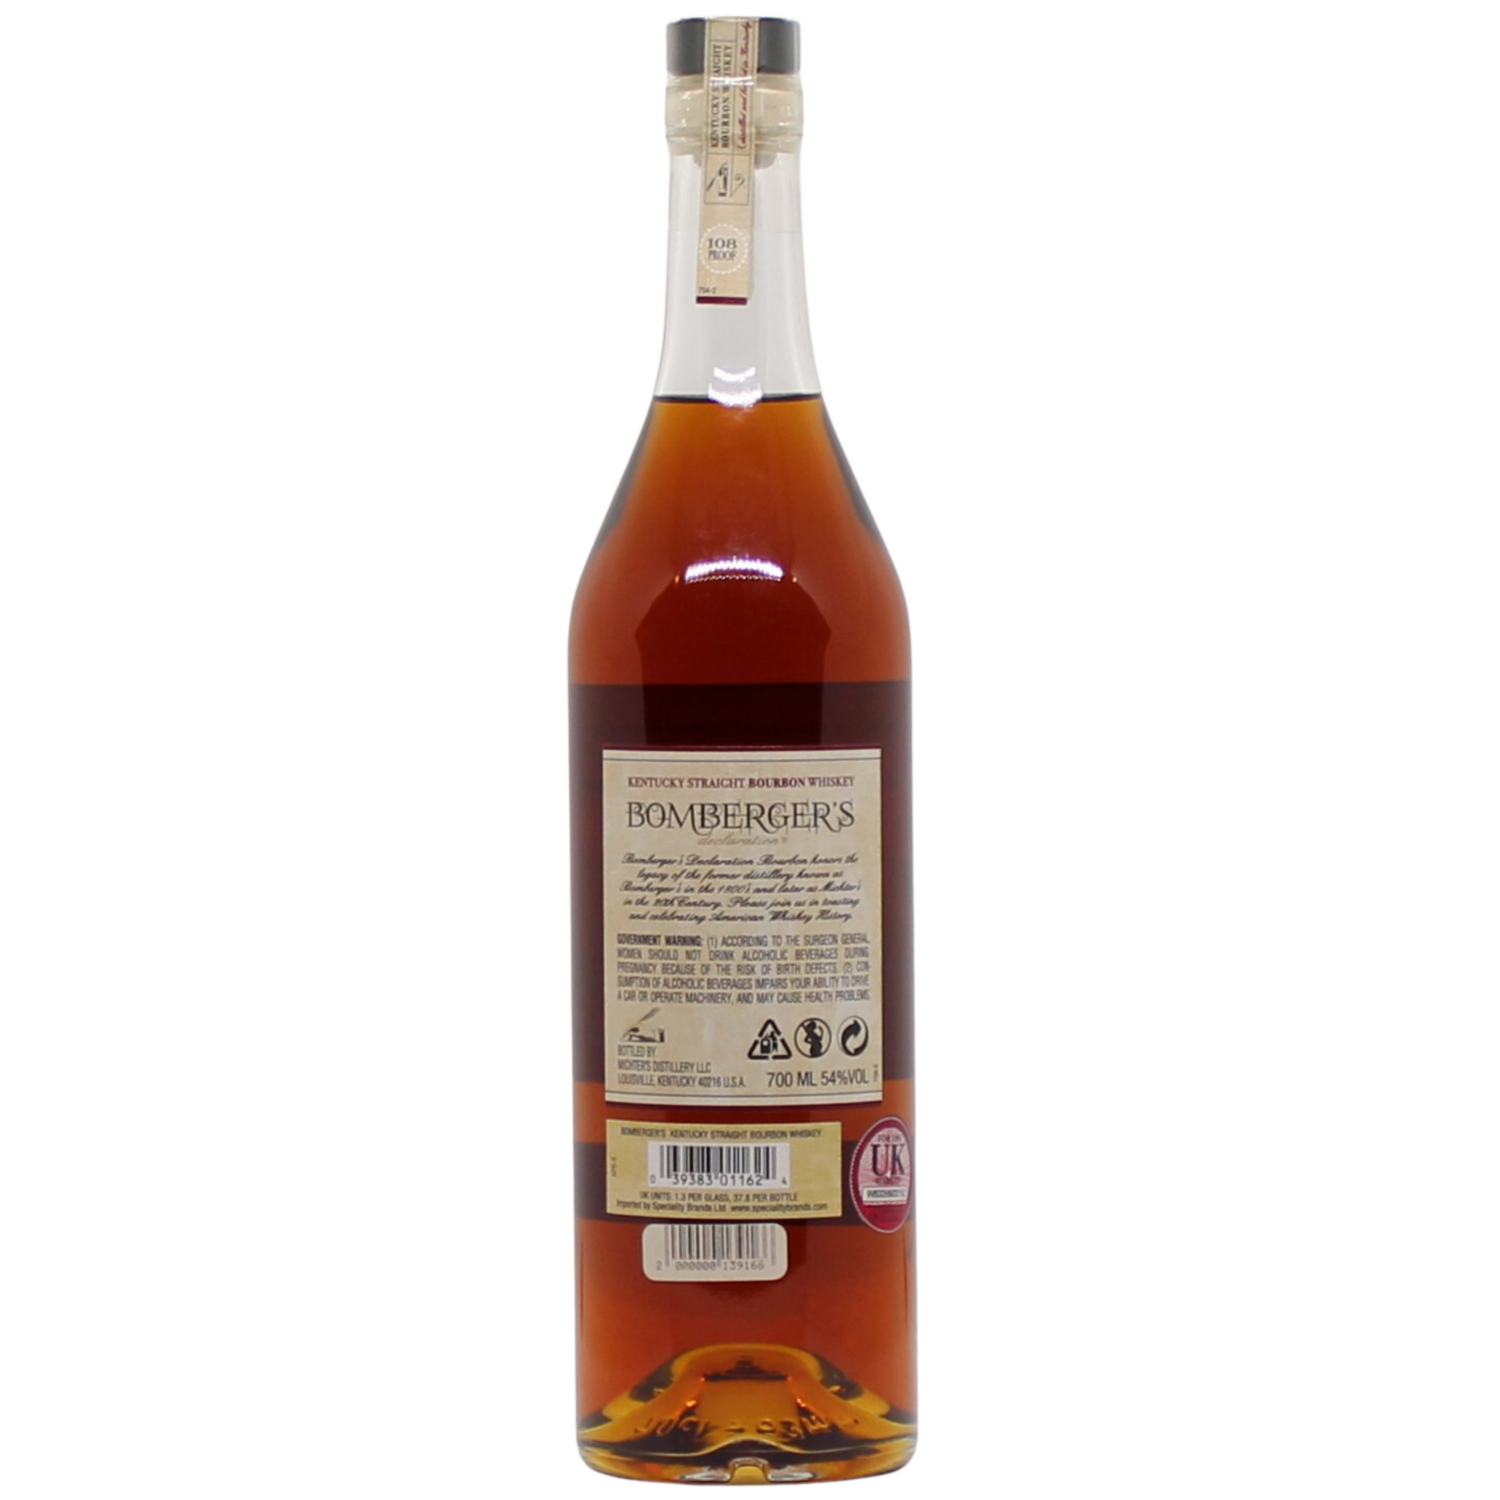 Similar to the 2019 and 2020 release the Bourbon was aged in special barrels, some of which were made from Chinquapin (Quercus muehlenbergii) Oak that has been naturally air dried for over 3 years. For this release the Char level was adjusted to accentuate the profile of this Whiskey.